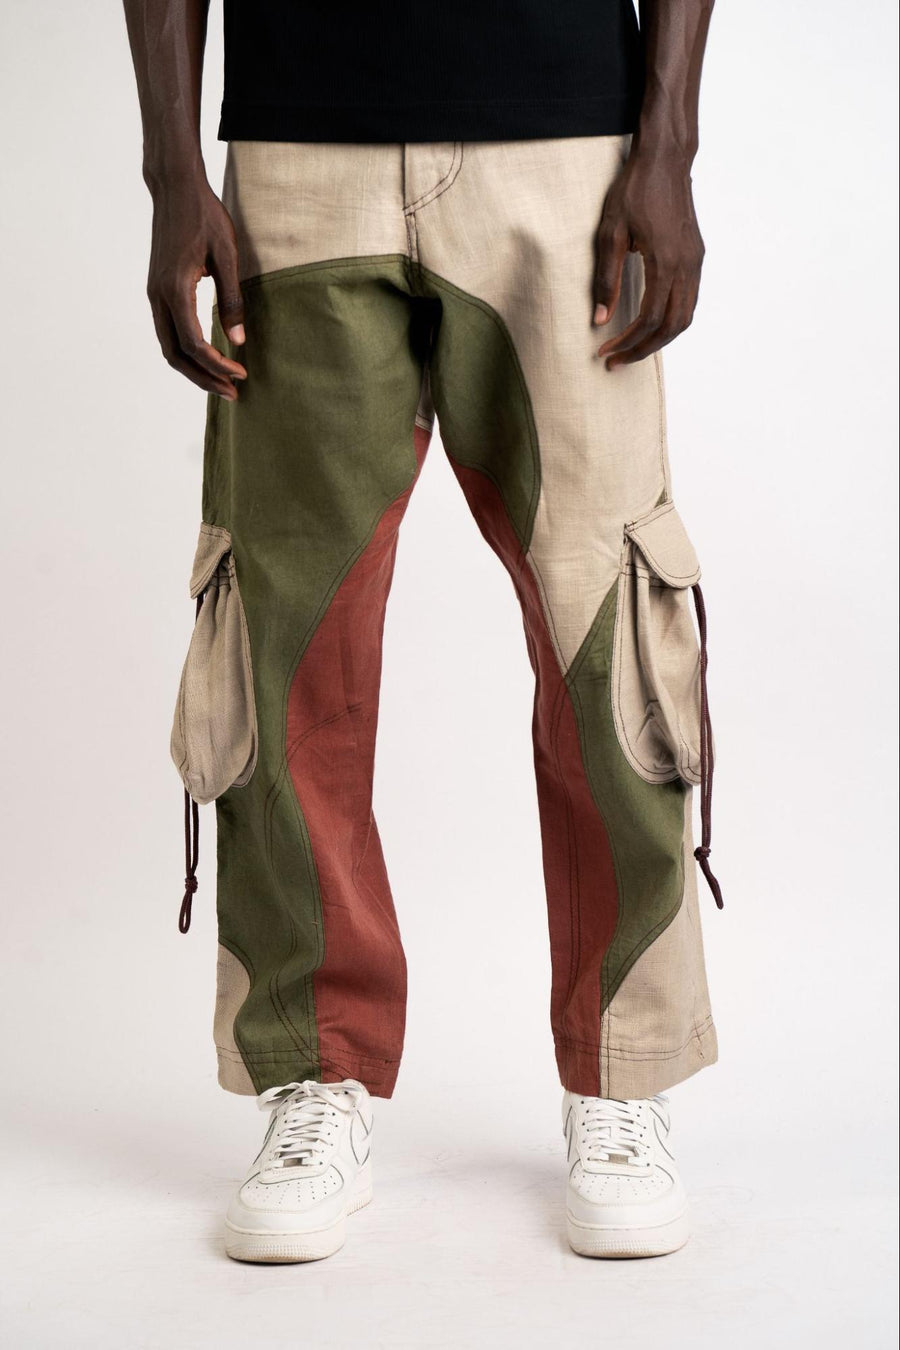 Multicolored Corded Pants